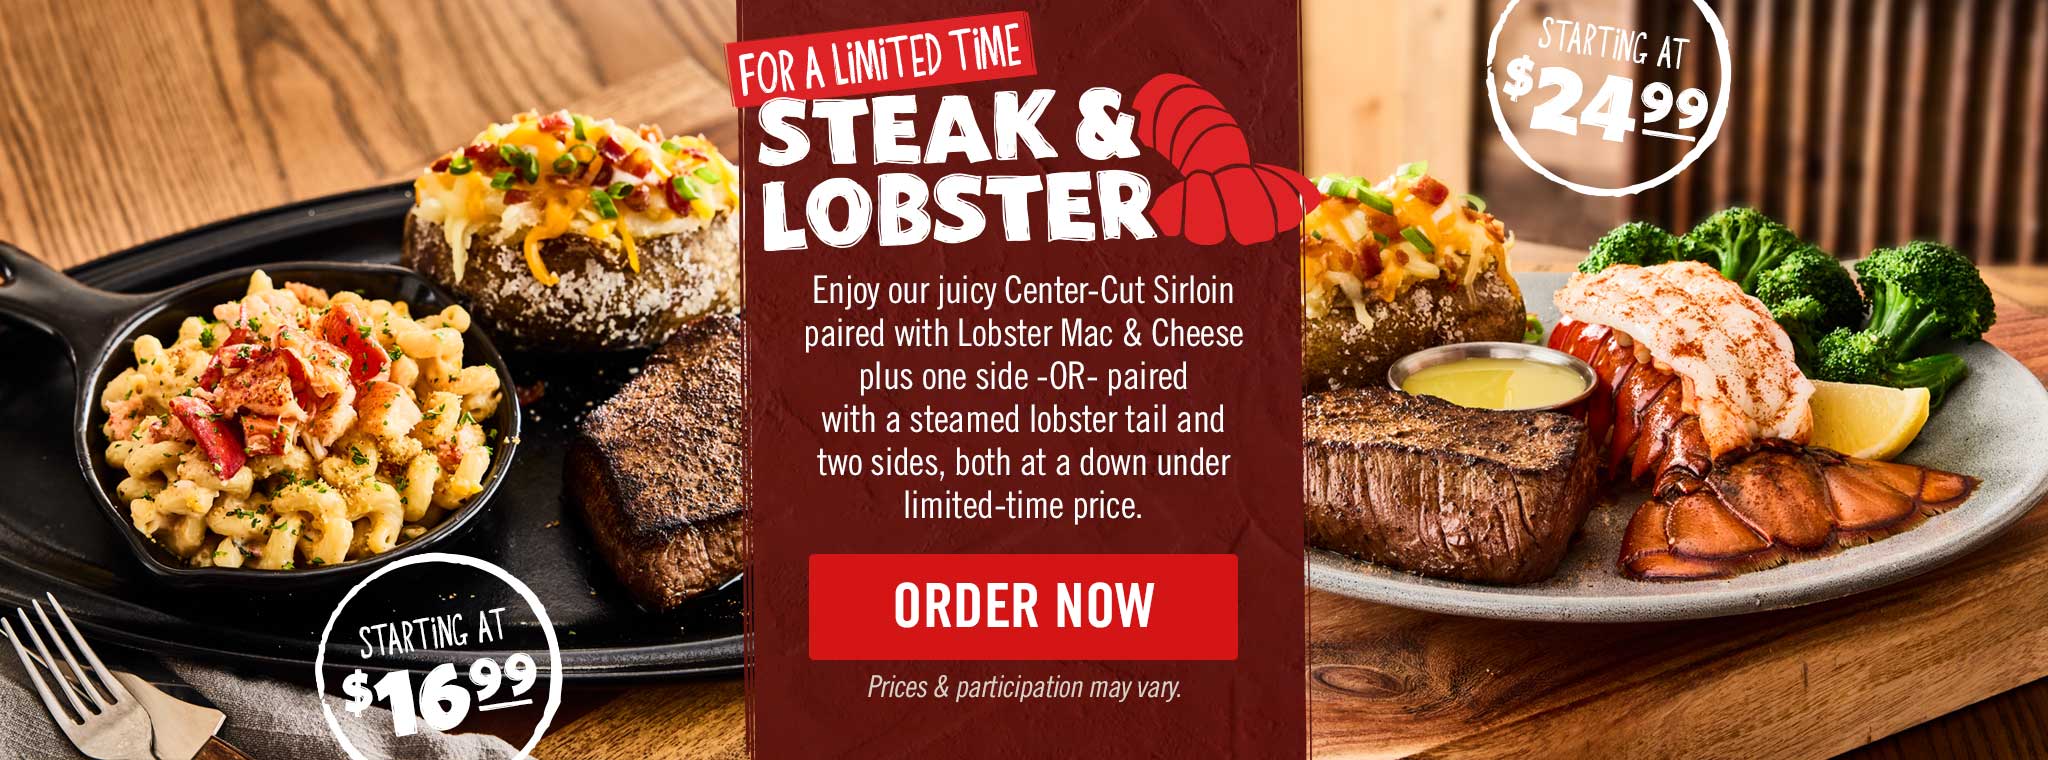 For A Limited Time Steak & Lobster. Order Now. Price & participation may vary.